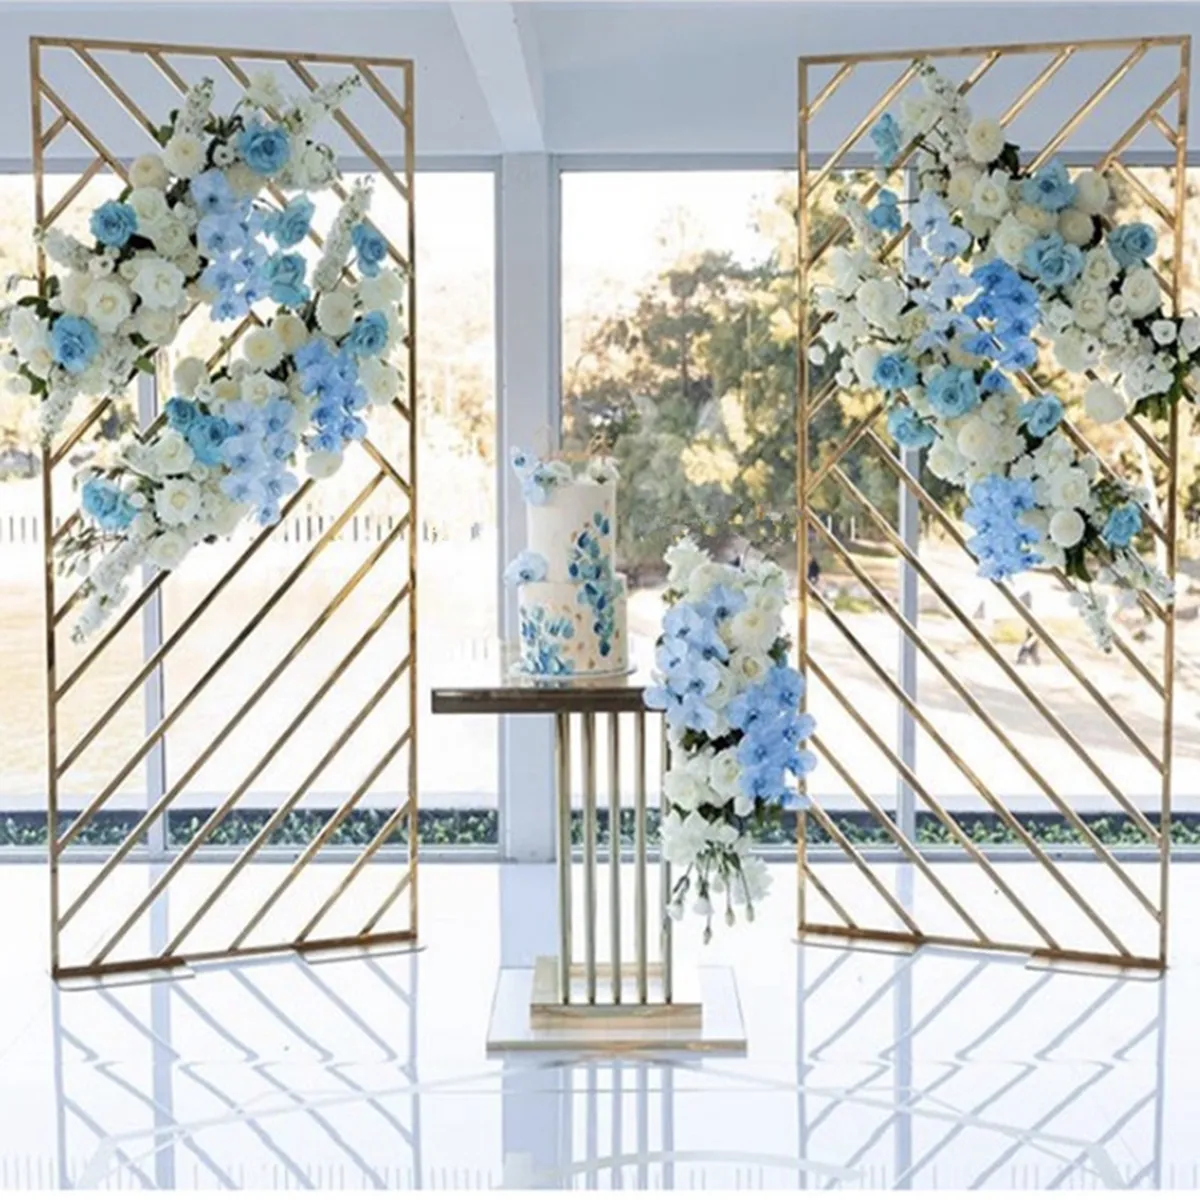 decoration Weddings Rental Square frames frame Gold Shiny Glossy Metal Iron Arch for Event Rectangular gold stainless steel cross over wedding backdrop